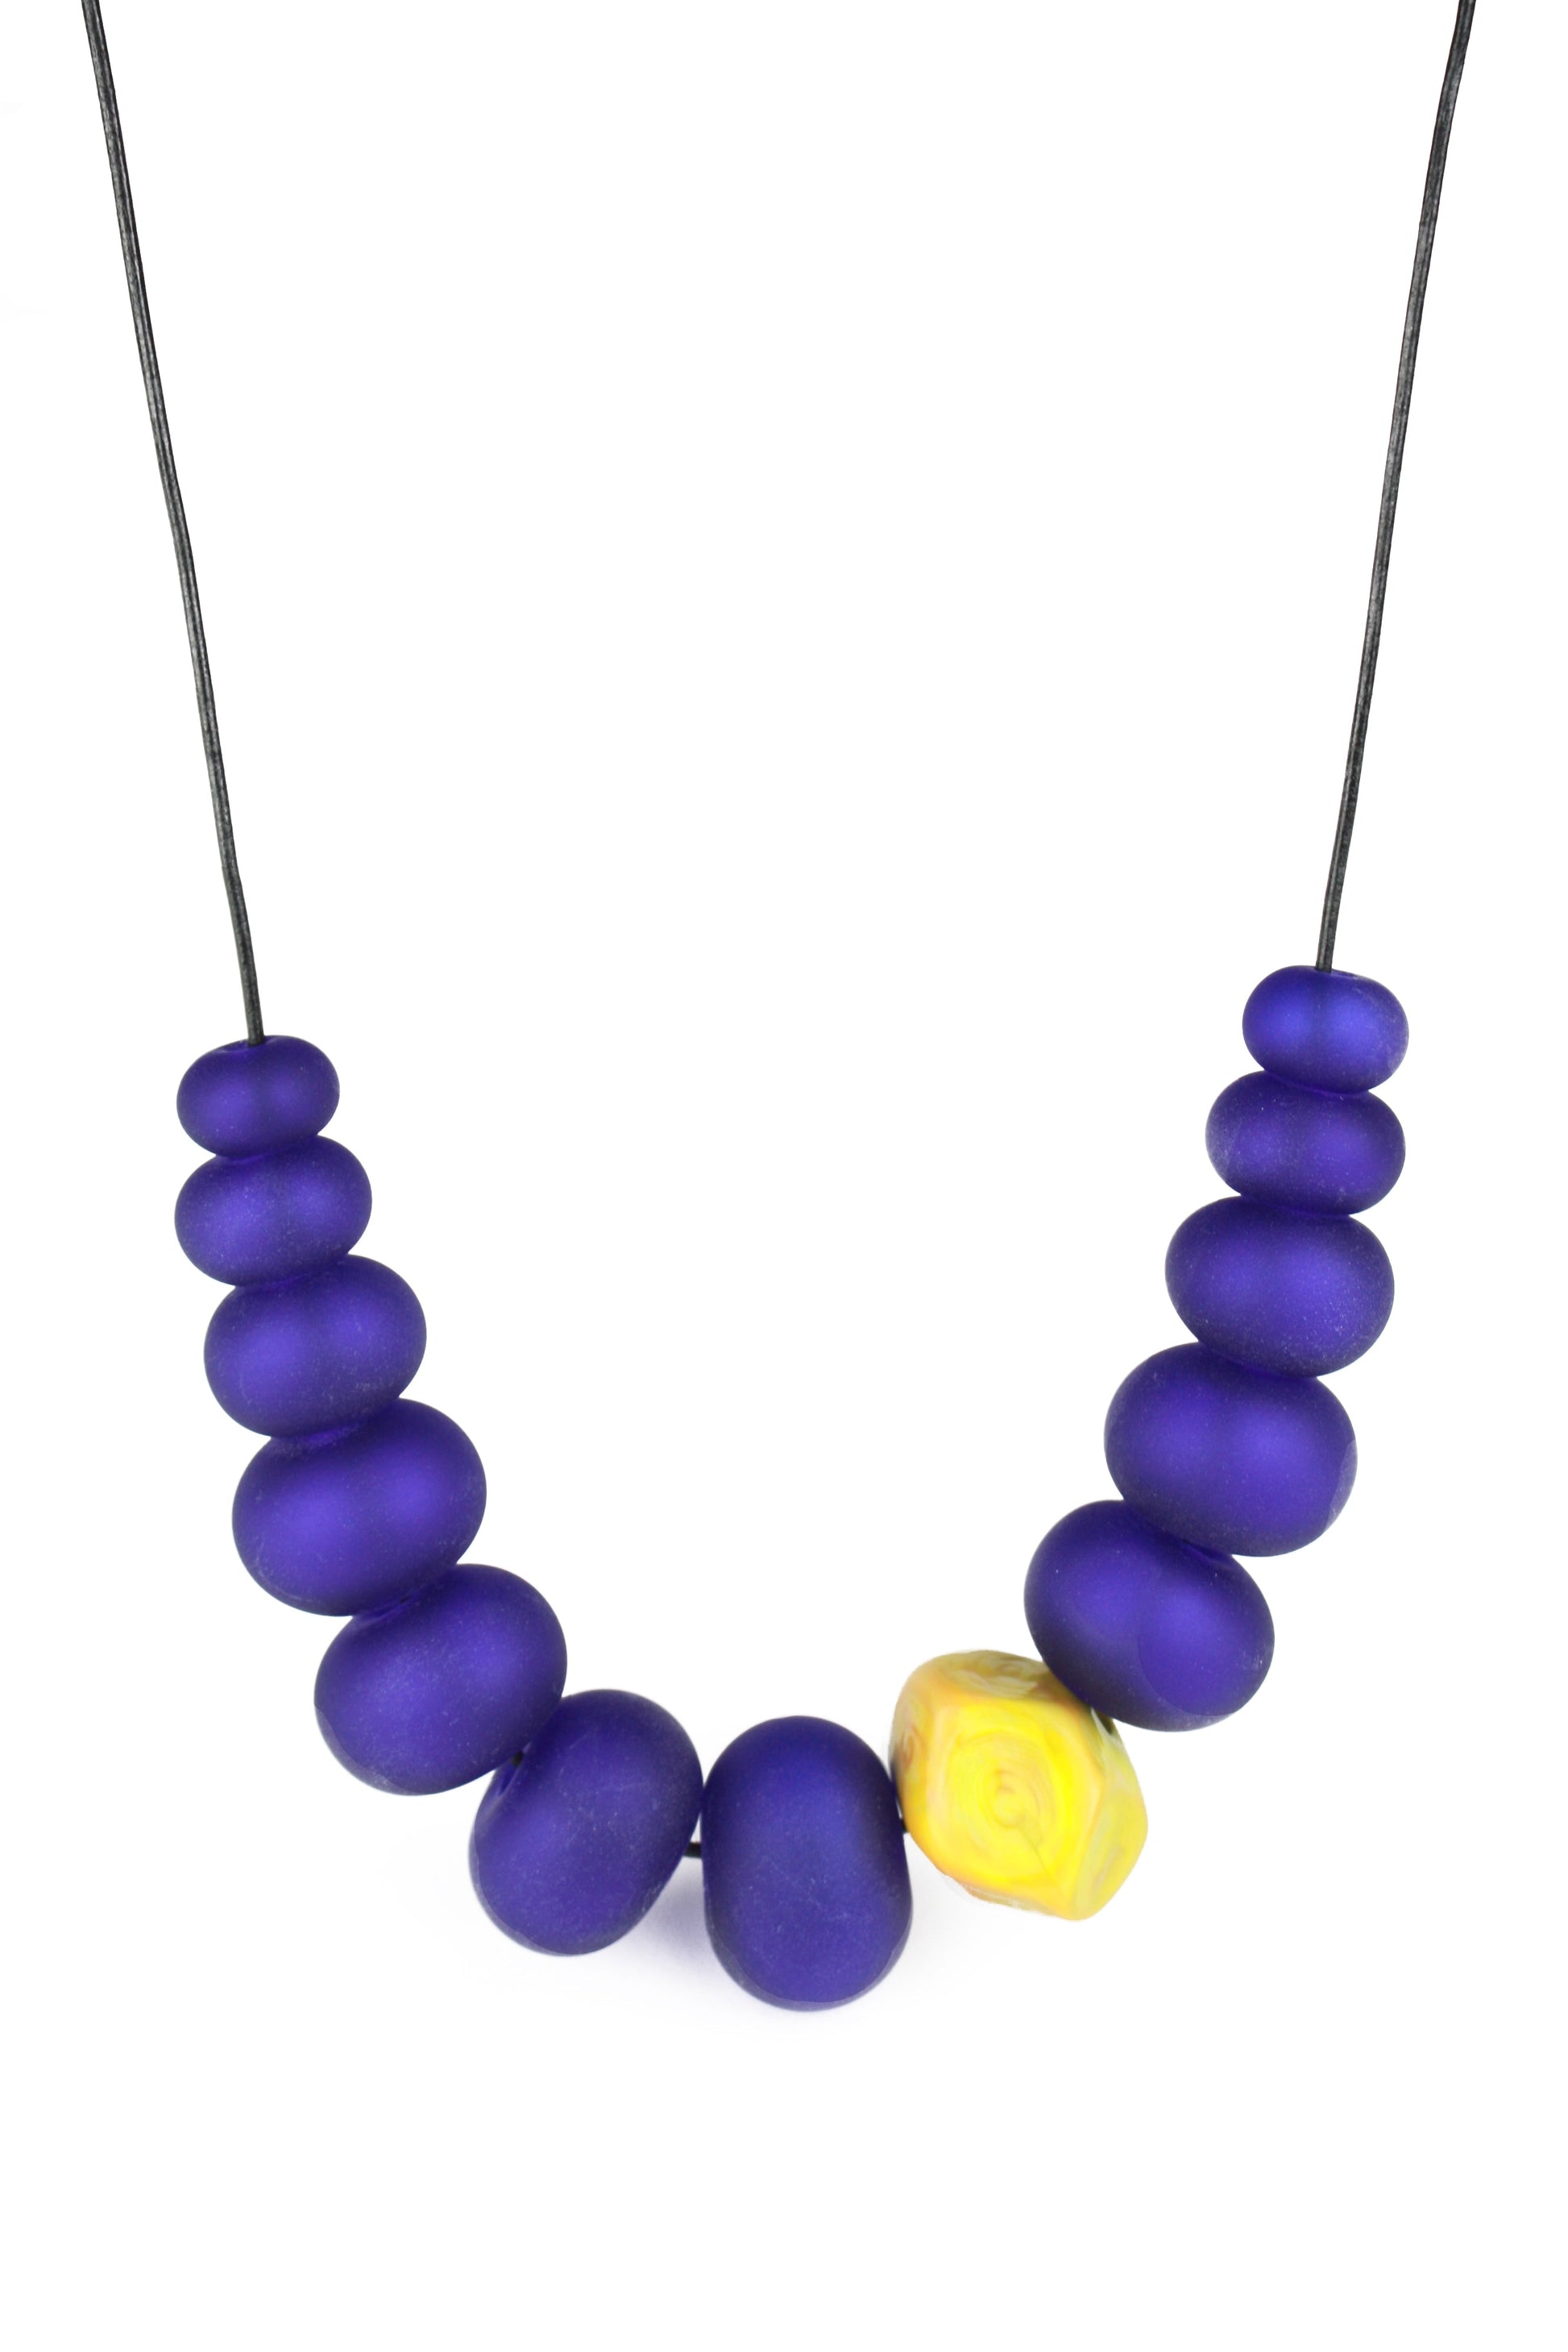 Necklace of hand blown and sandblasted hollow beads in cobalt blue glass paired with a ochre yellow glass nugget bead and strung on adjustable leather